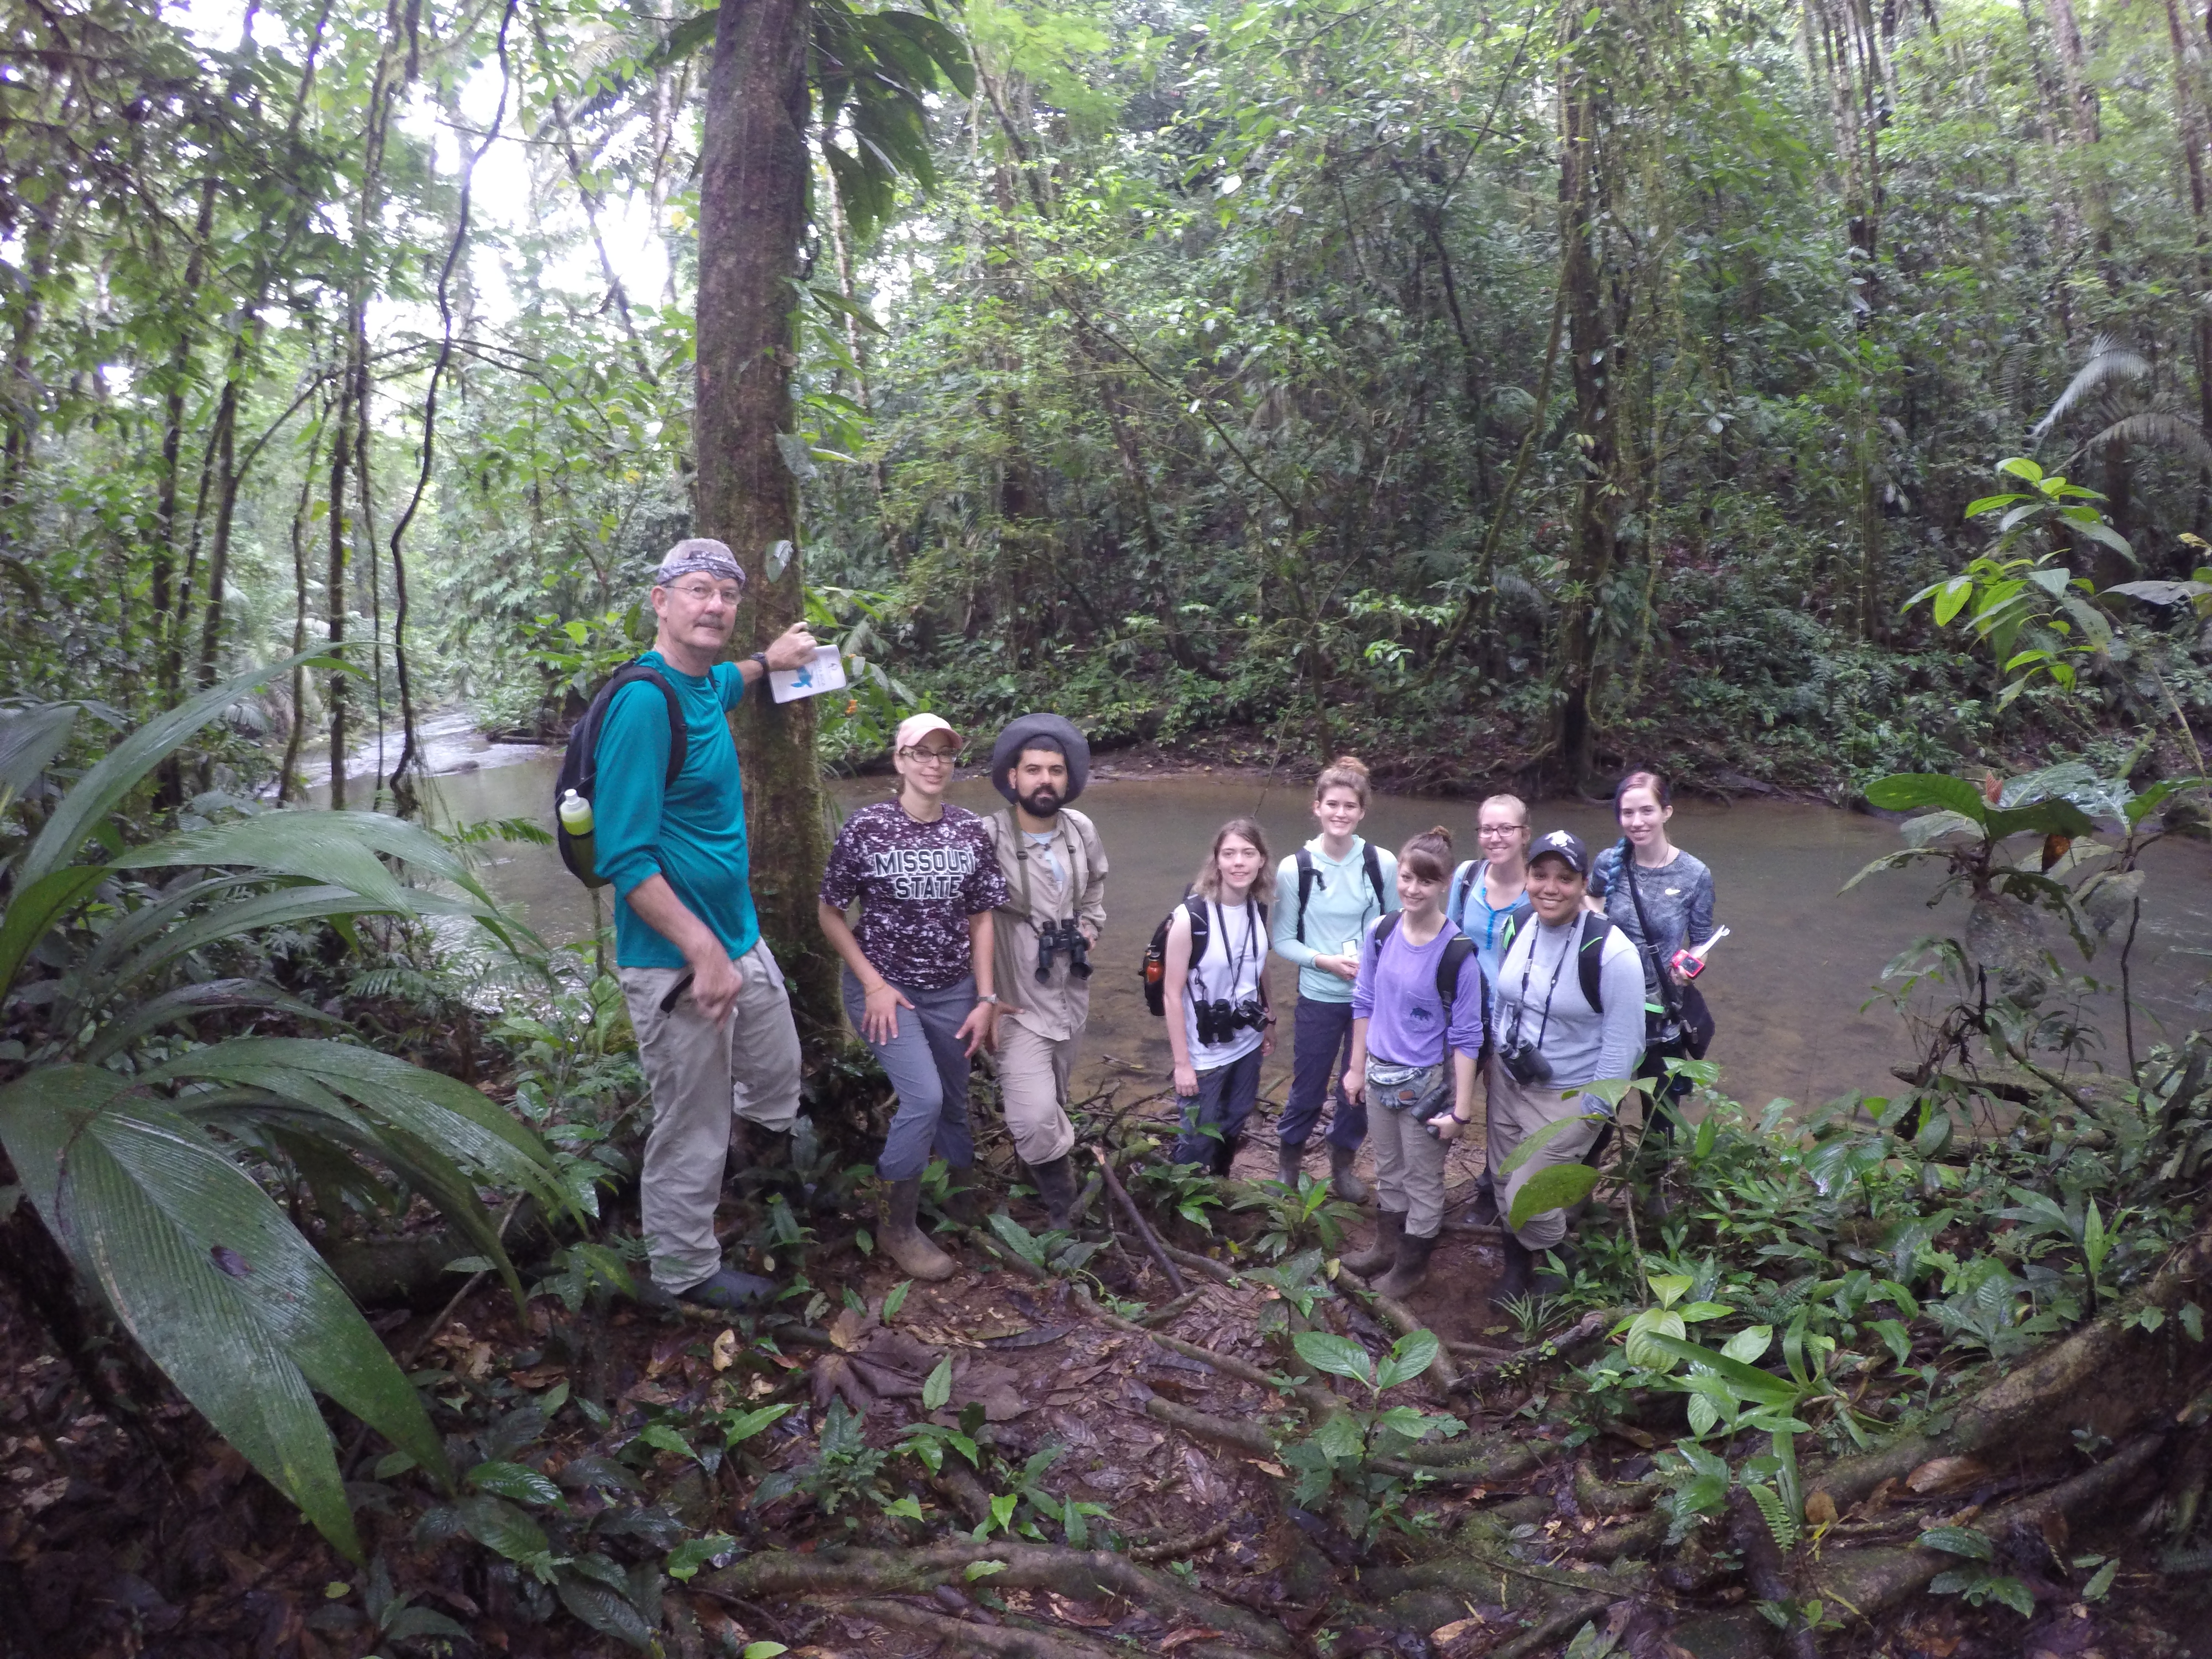 Students exploring the jungles of Costa Rica for biology research.